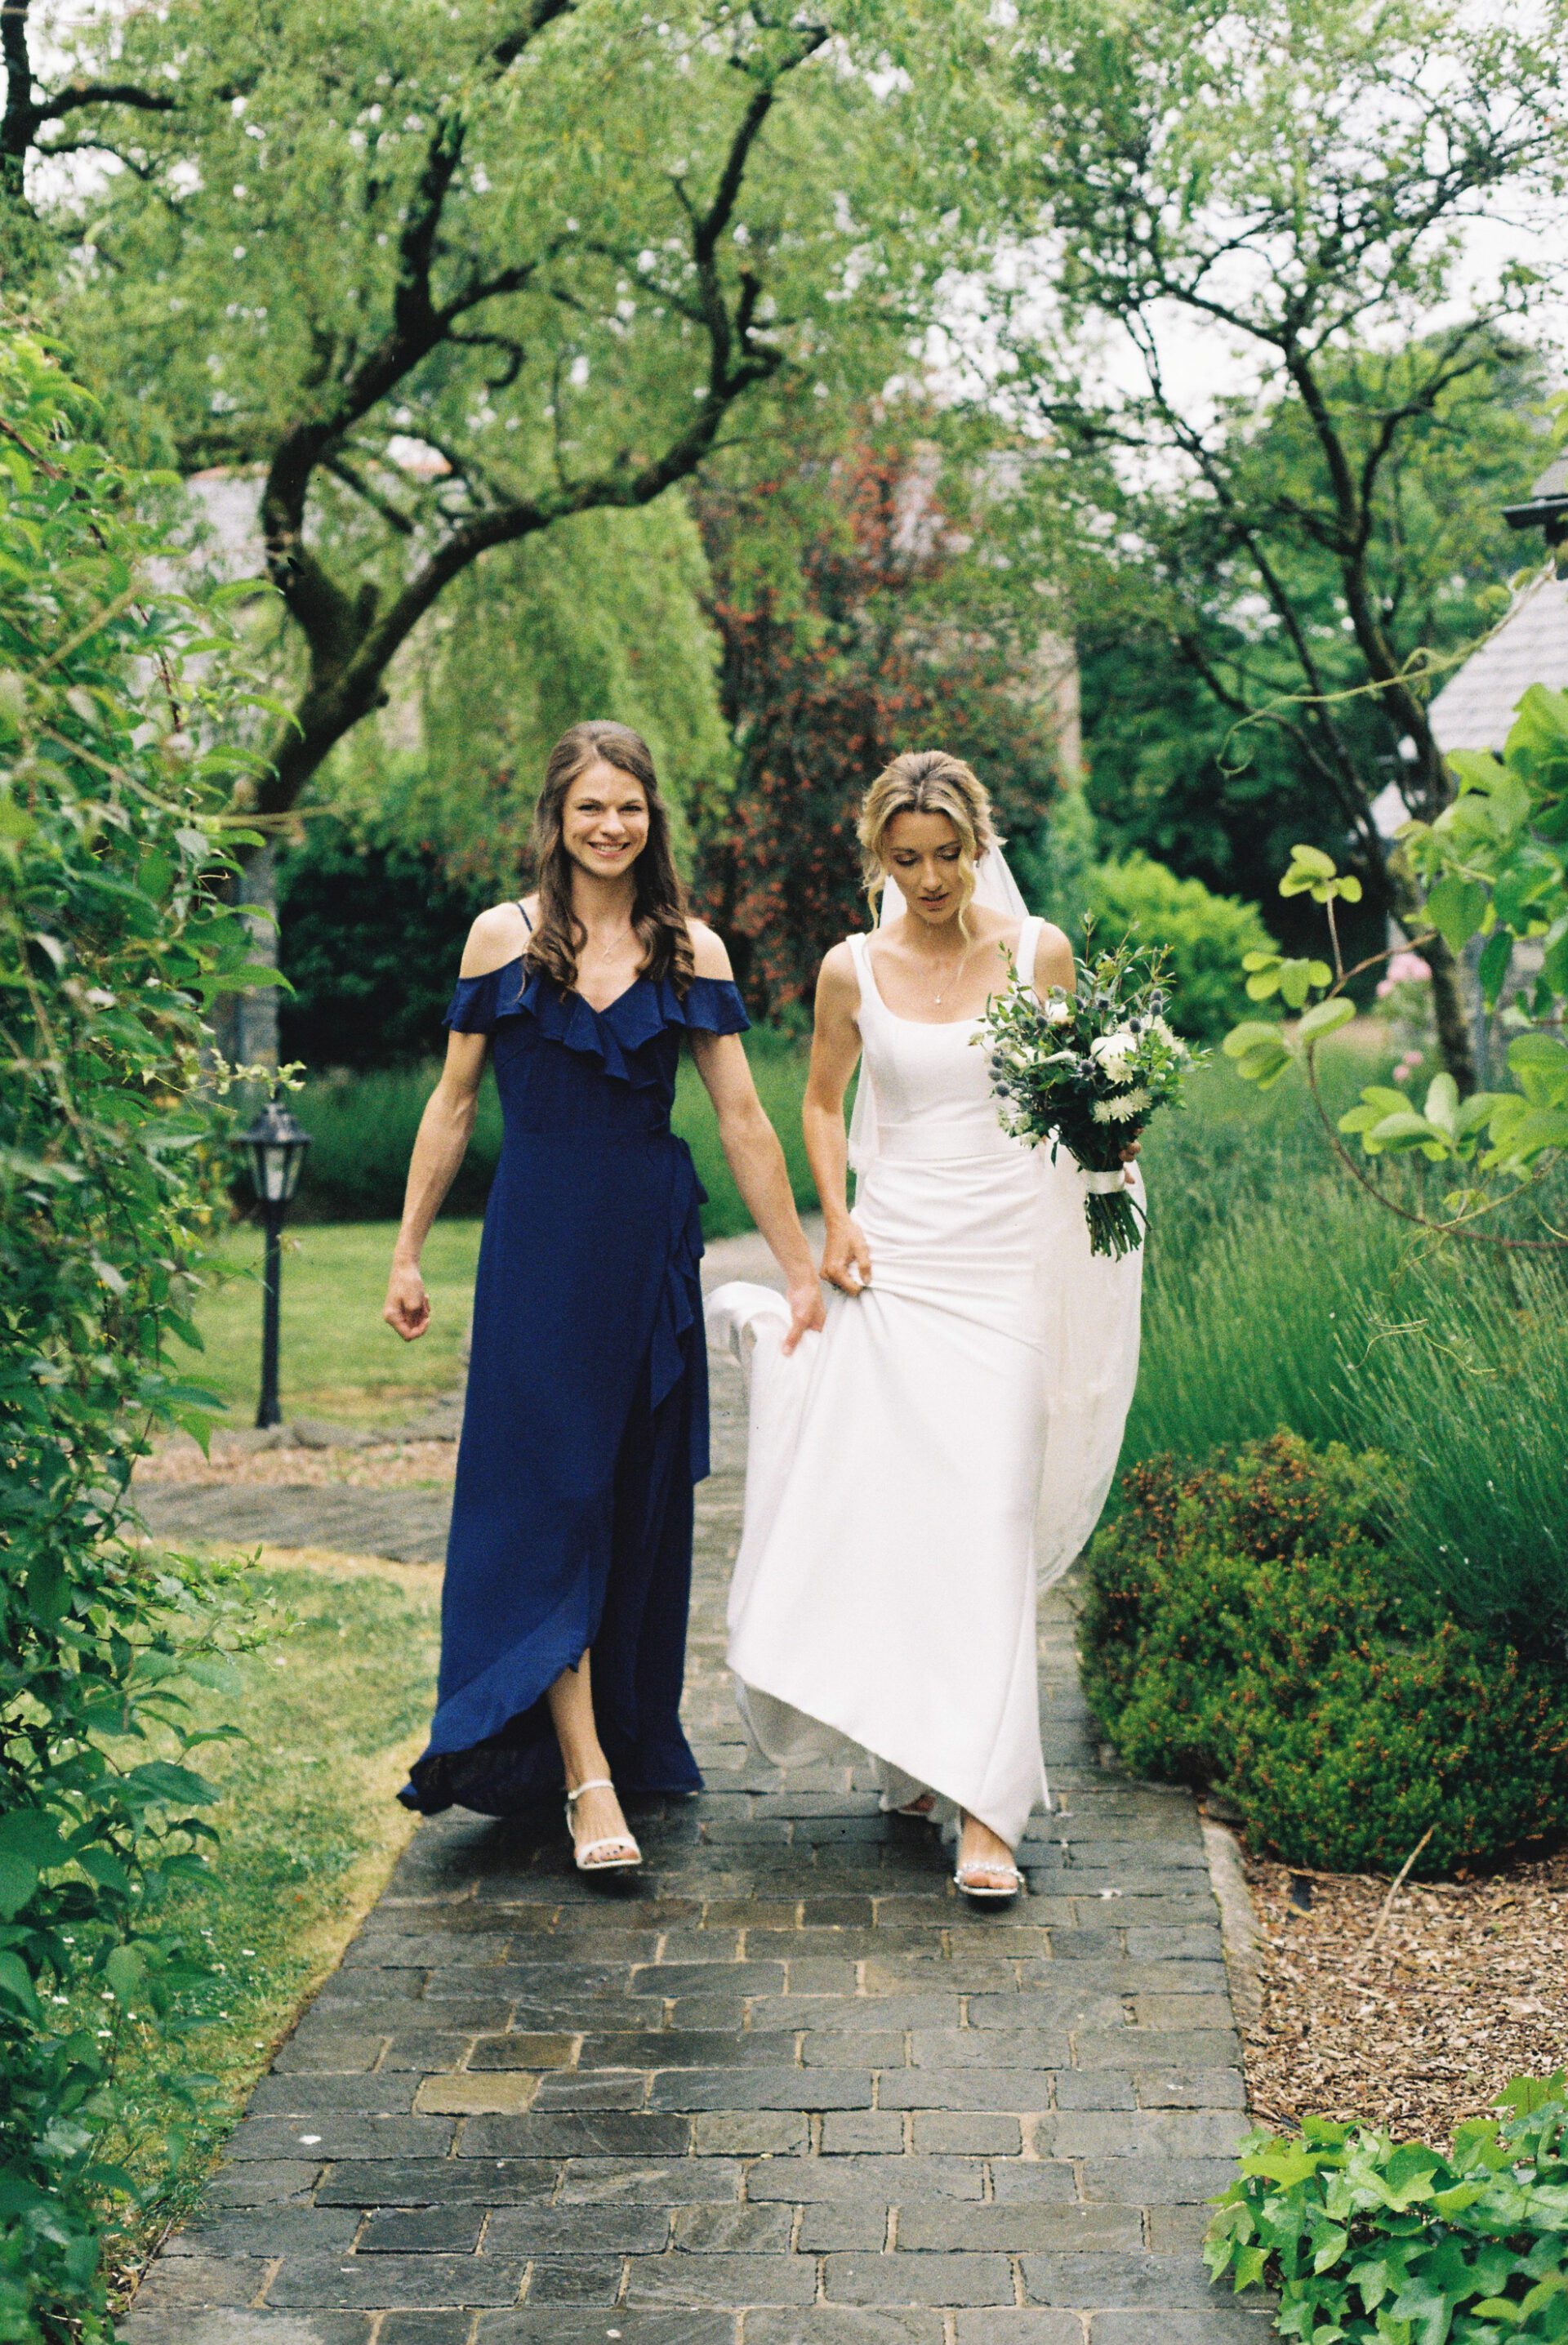 The bride walks with her bridesmaid on 35mm film